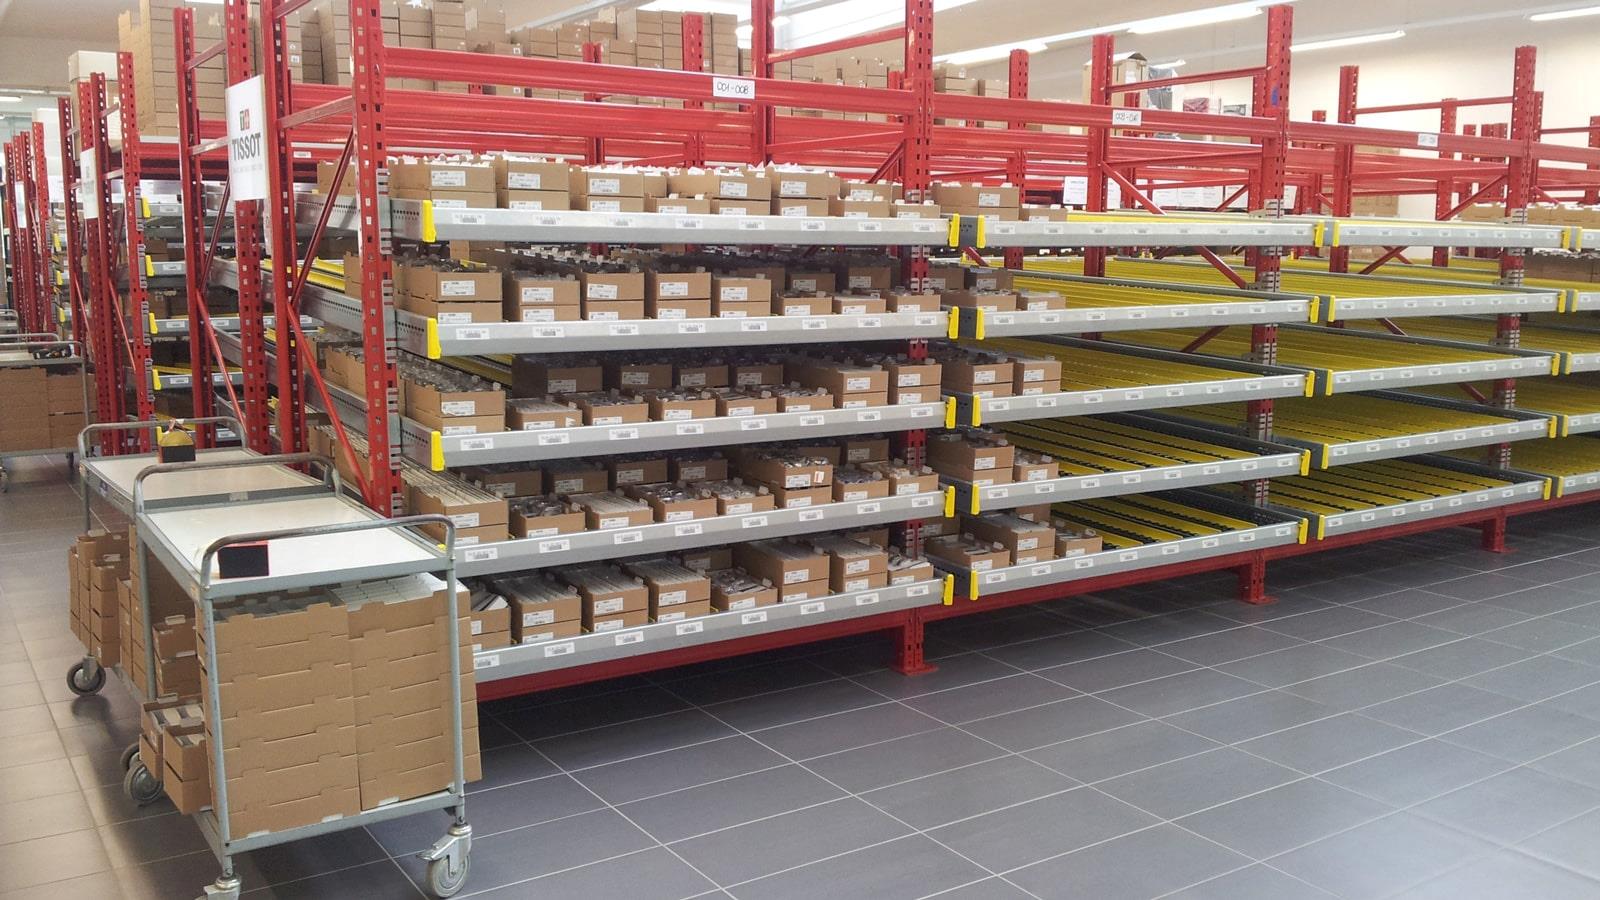 Cardboard boxes with Tissot watches on shelves in the warehouse 